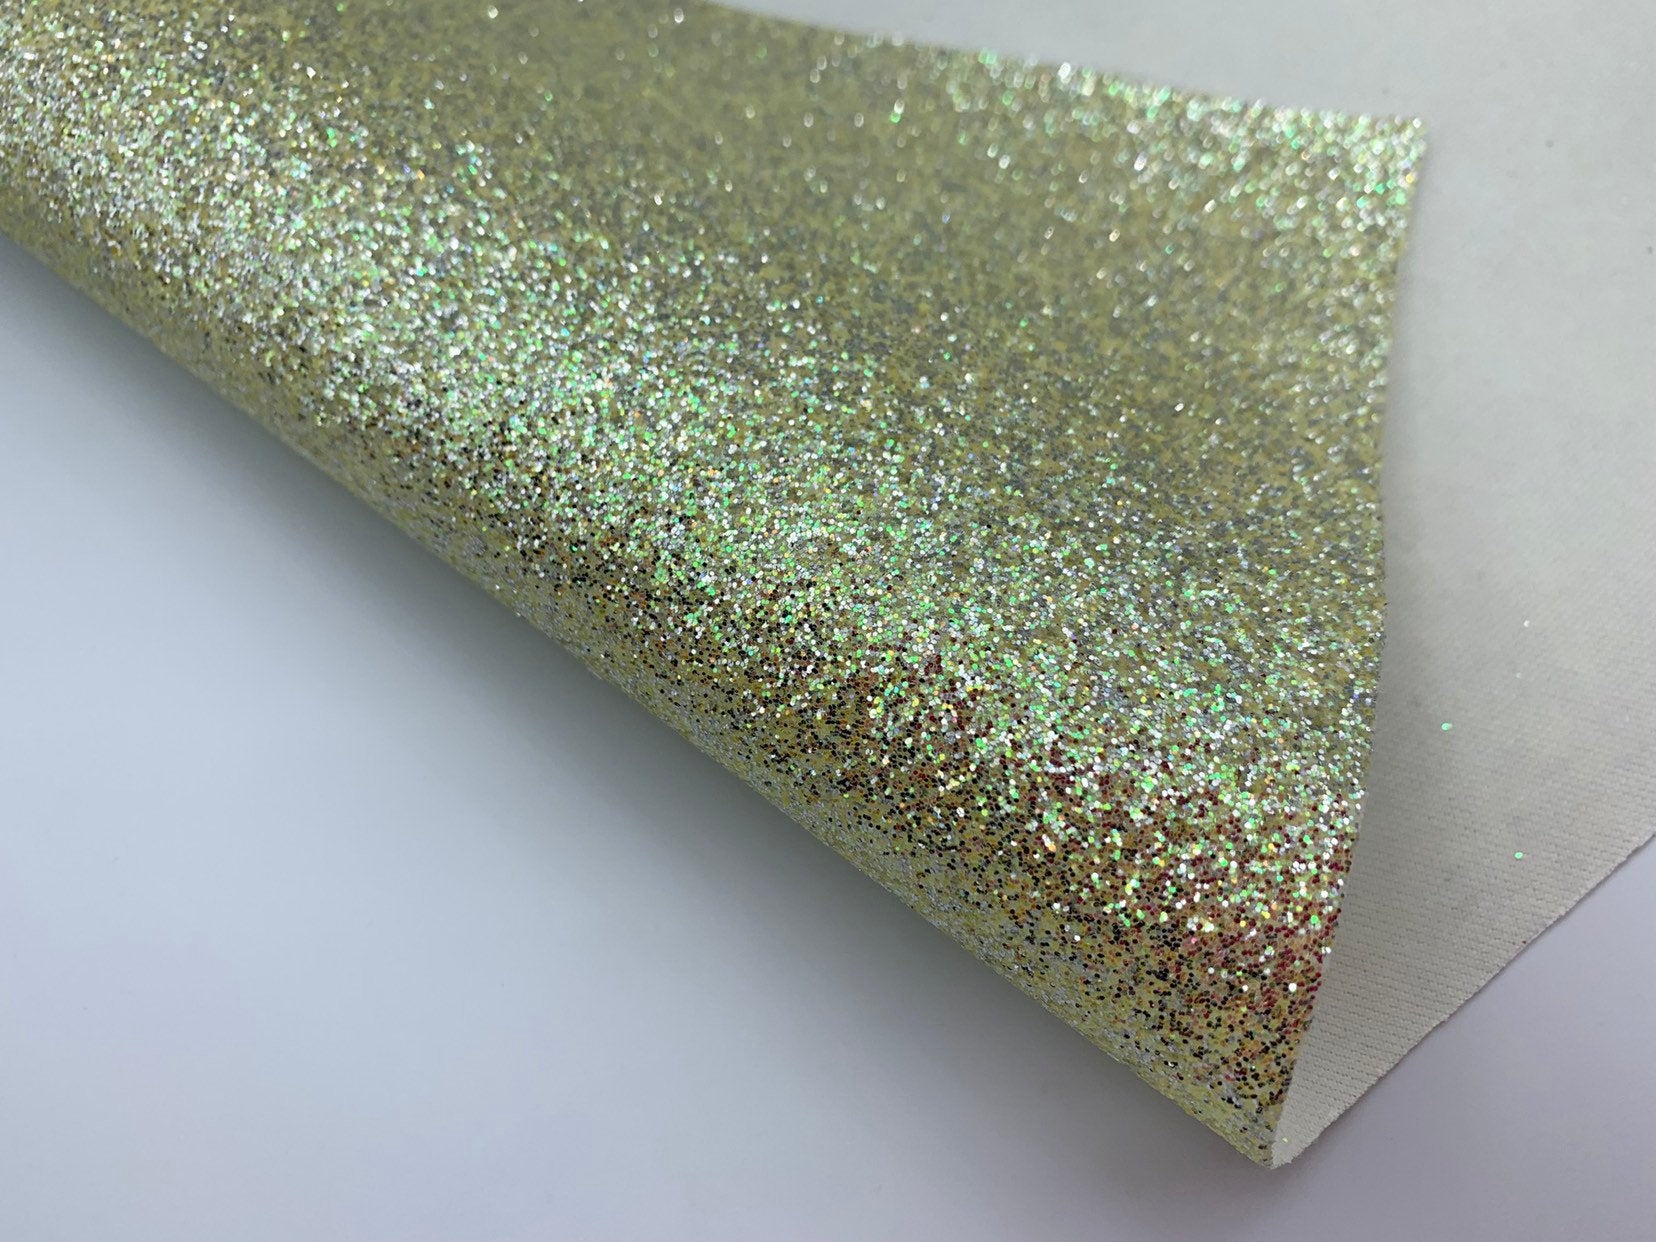 1 sheet, 20x34cm, Synthetic / Glittered PU Leather fabric for DIY earring pendants purse or bow in yellow and silver glitter